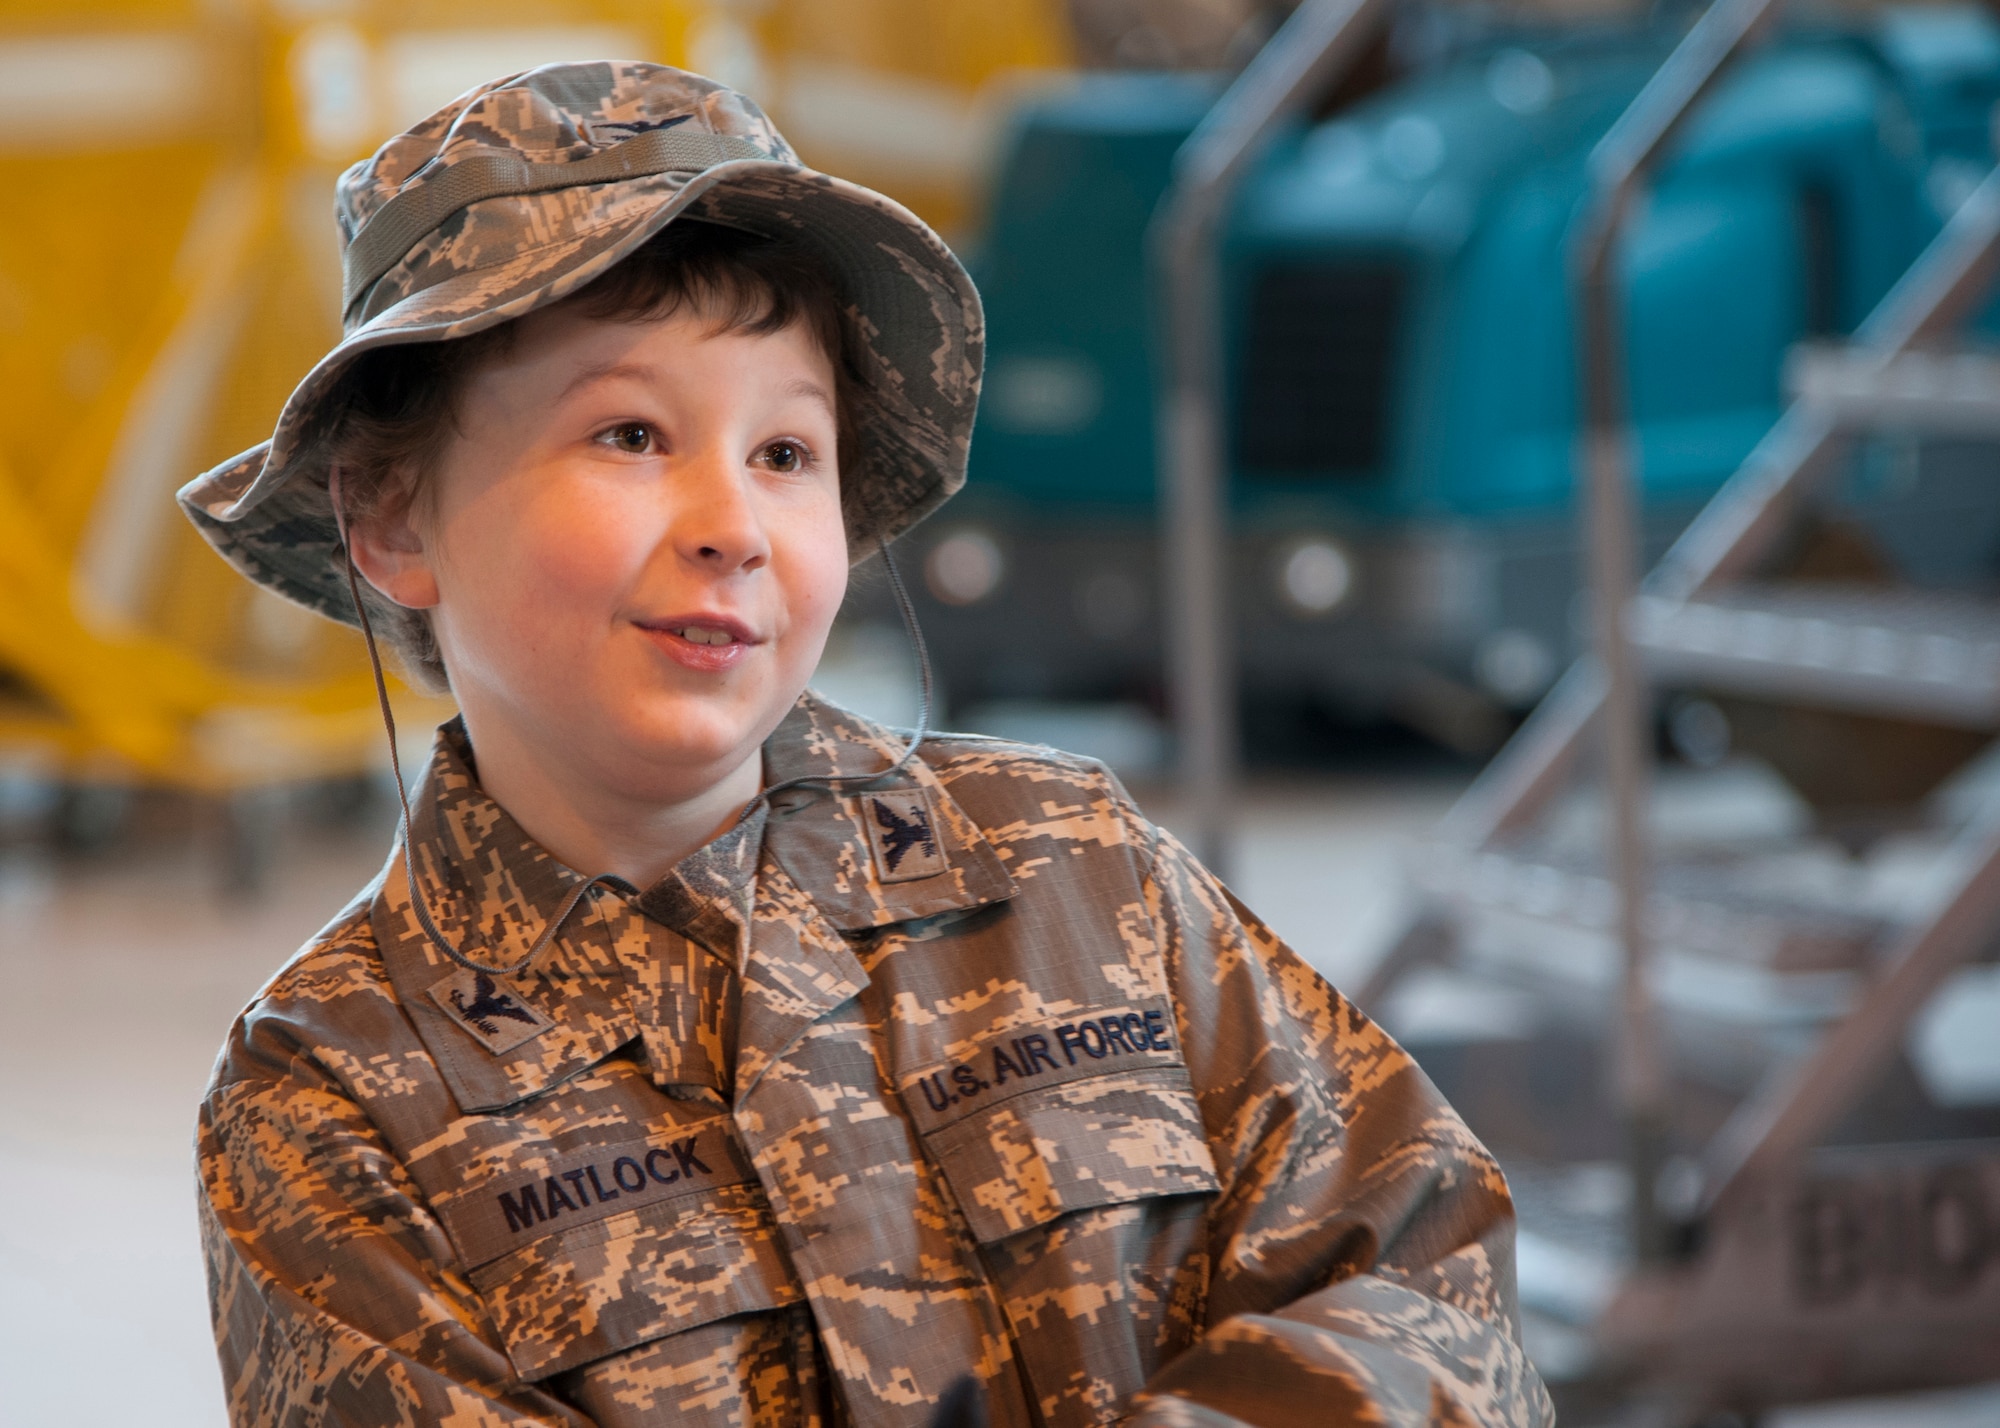 Maxwell Matlock, 10, smiles after getting down from the top of a B-52H Stratofortress on Barksdale Air Force Base, La., Dec. 18, 2014. Matlock was diagnosed with high-risk T Cell Acute Lymphoblastic Leukemia and was given a tour of a B-52H Stratofortress, presented with several items and received the title of Honorary Crew Chief to help keep his spirits up while he battles cancer. (U.S. Air Force photo/Senior Airman Joseph A. Pagán Jr.)